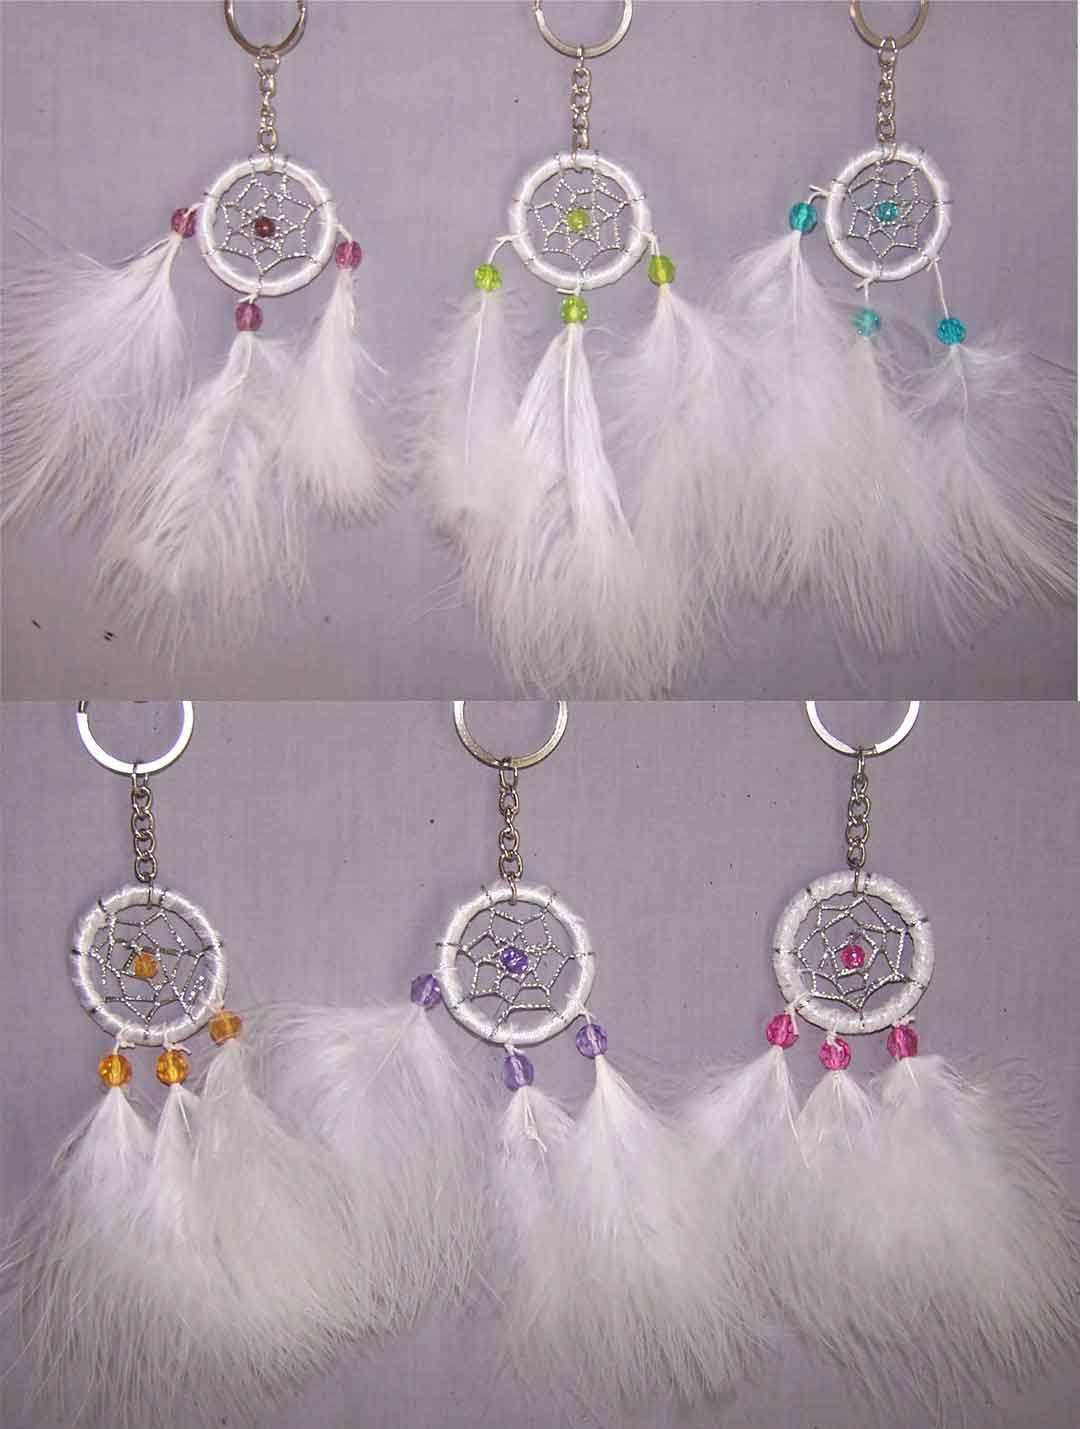 Native Pride  Tribal Dream Catcher Key Chains White Feathers